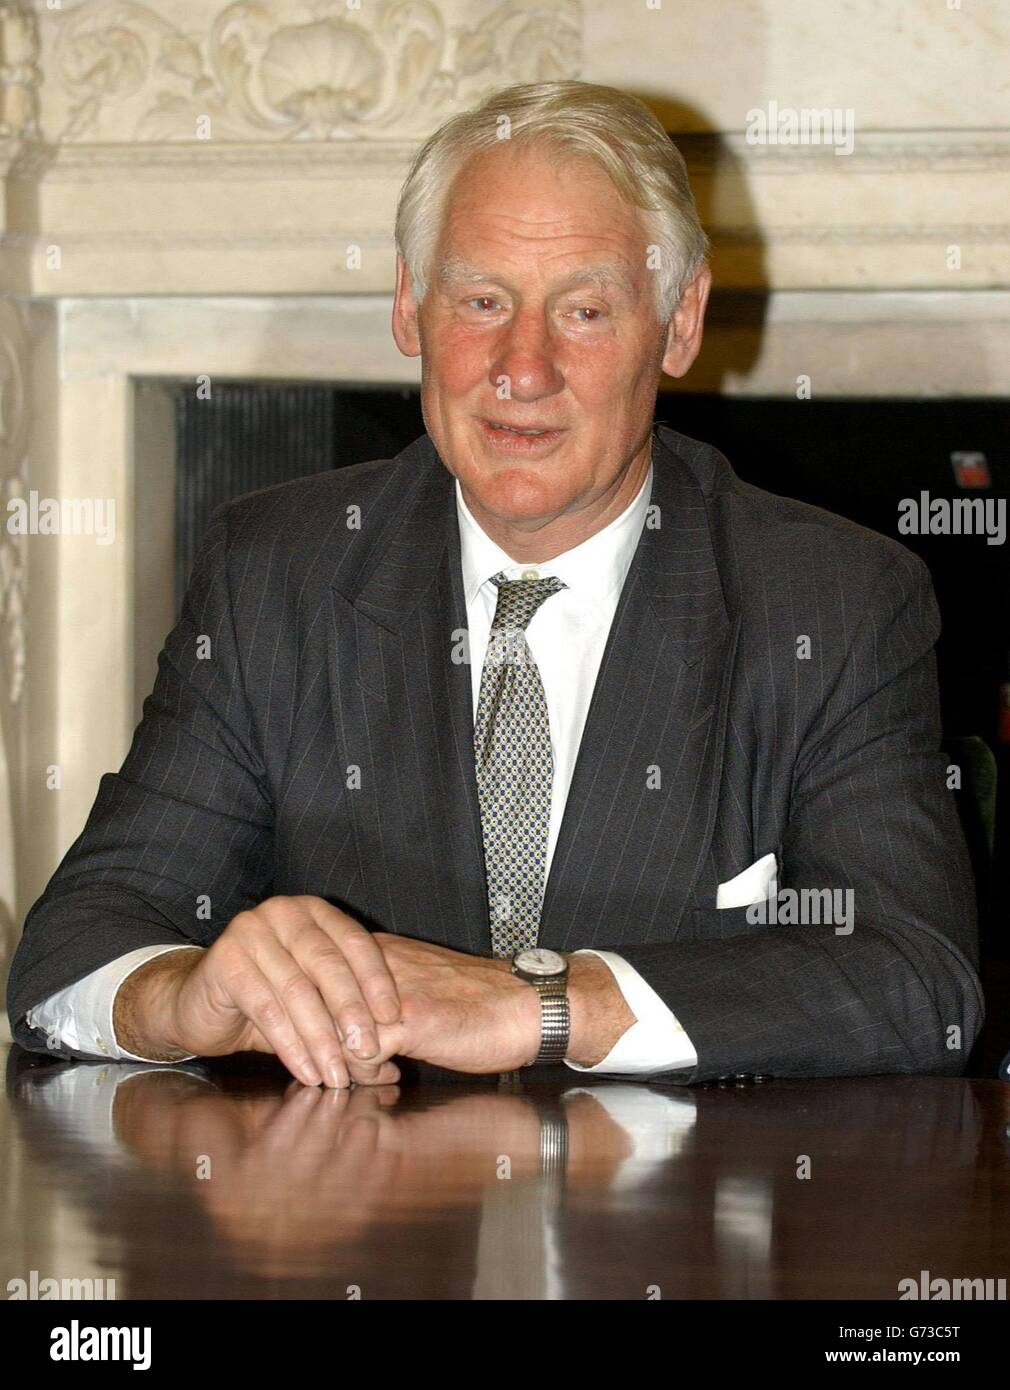 Lord Butler of Brockwell, the Chairman of the Commitee to Review Intelligence on Weapons of Mass Destruction, in London. Lord Butler is due to publish his report into the use of intelligence on weapons of mass destruction in the run-up to the war with Iraq at 12.30pm Wednesday July 14, 2004. Stock Photo